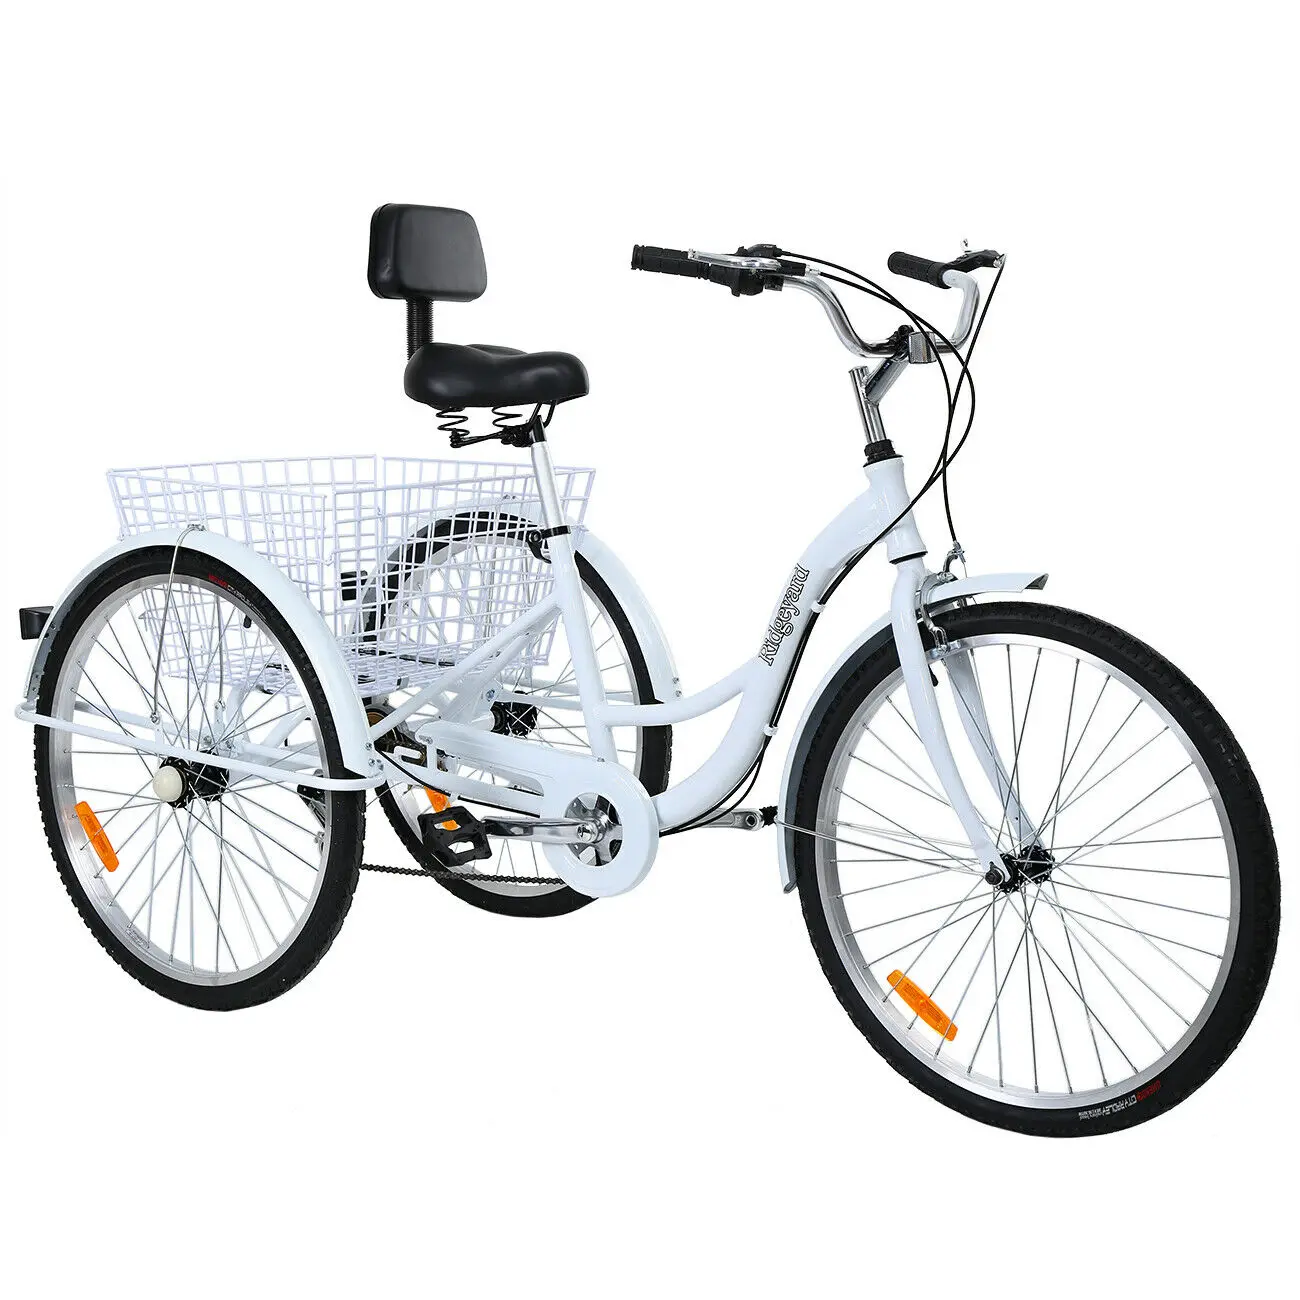 26” Inch 7 Speed Adult Tricycle 3 Wheel Basket Shopping Cart Aluminum  Bicycle Seat Backrest Support Bike White Trike - AliExpress